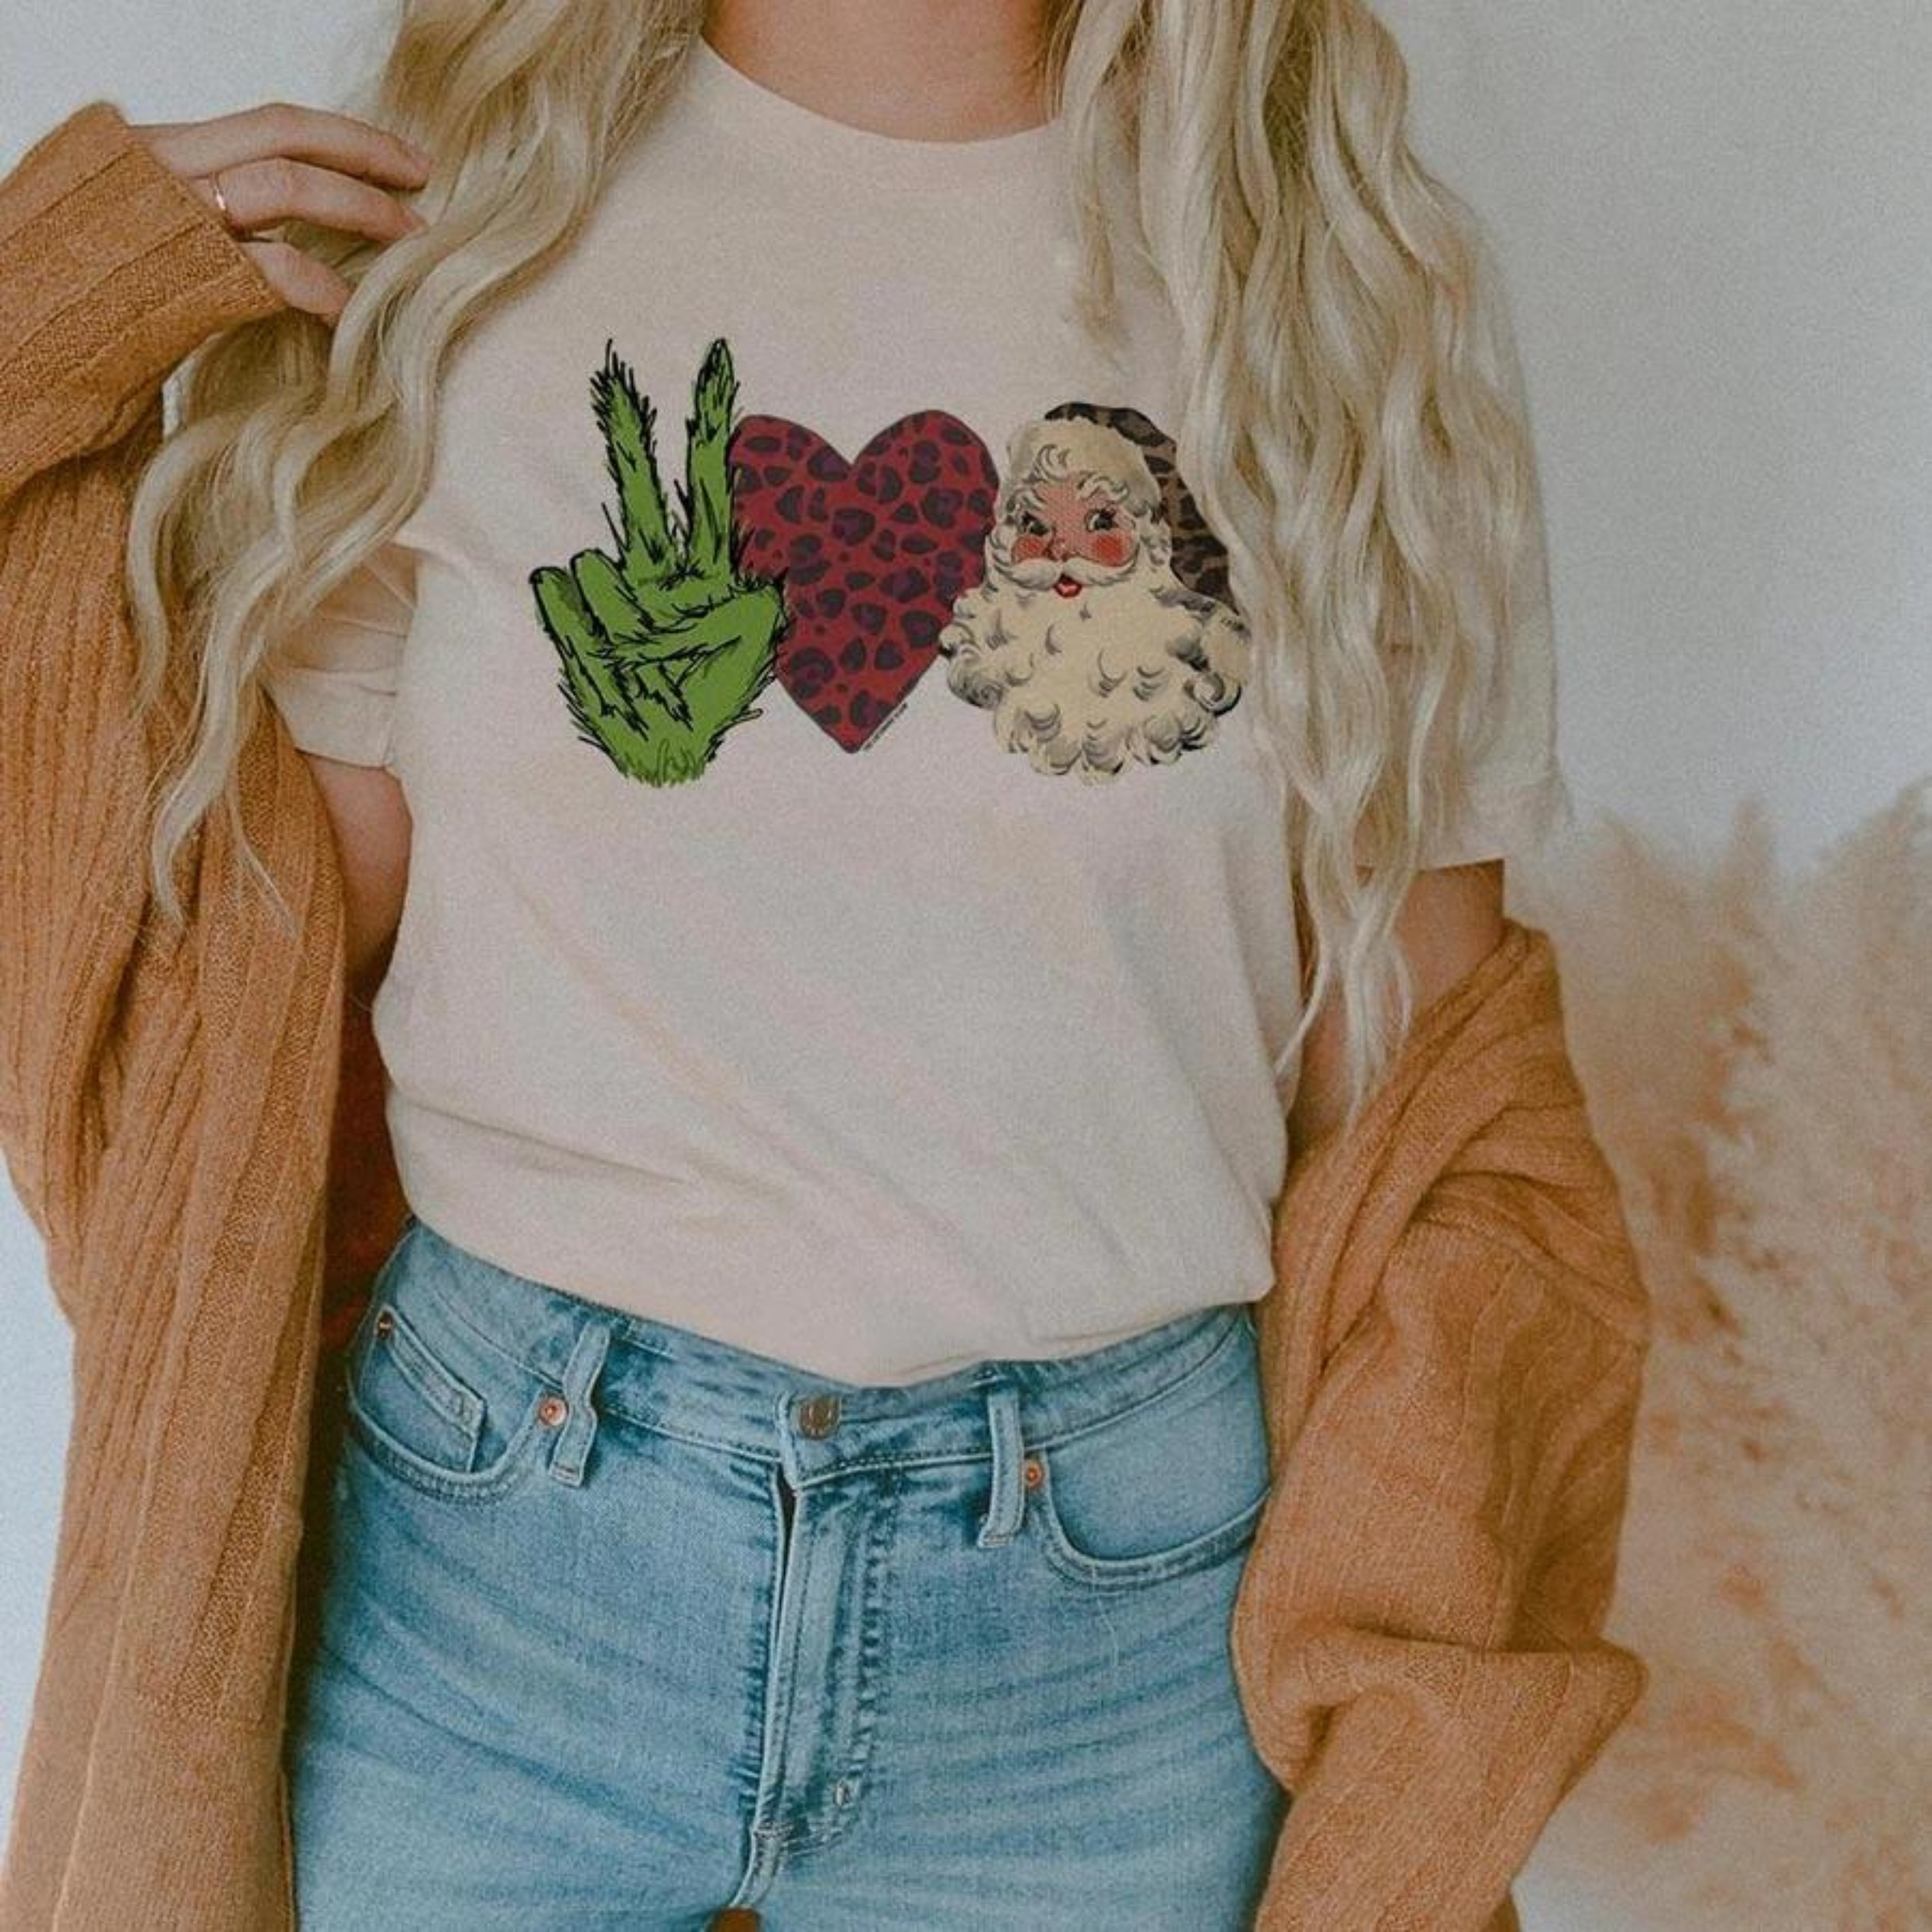 This cream tee includes a crew neckline, short sleeves, and a cute Christmas graphic of a Grinch hand throwing up a peace sign, a red leopard print heart, and a Santa Clause with a leopard hat side by side. The model has this graphic tee styled with rolled sleeves, a camel cardigan, and a light wash pair of denim jeans. 